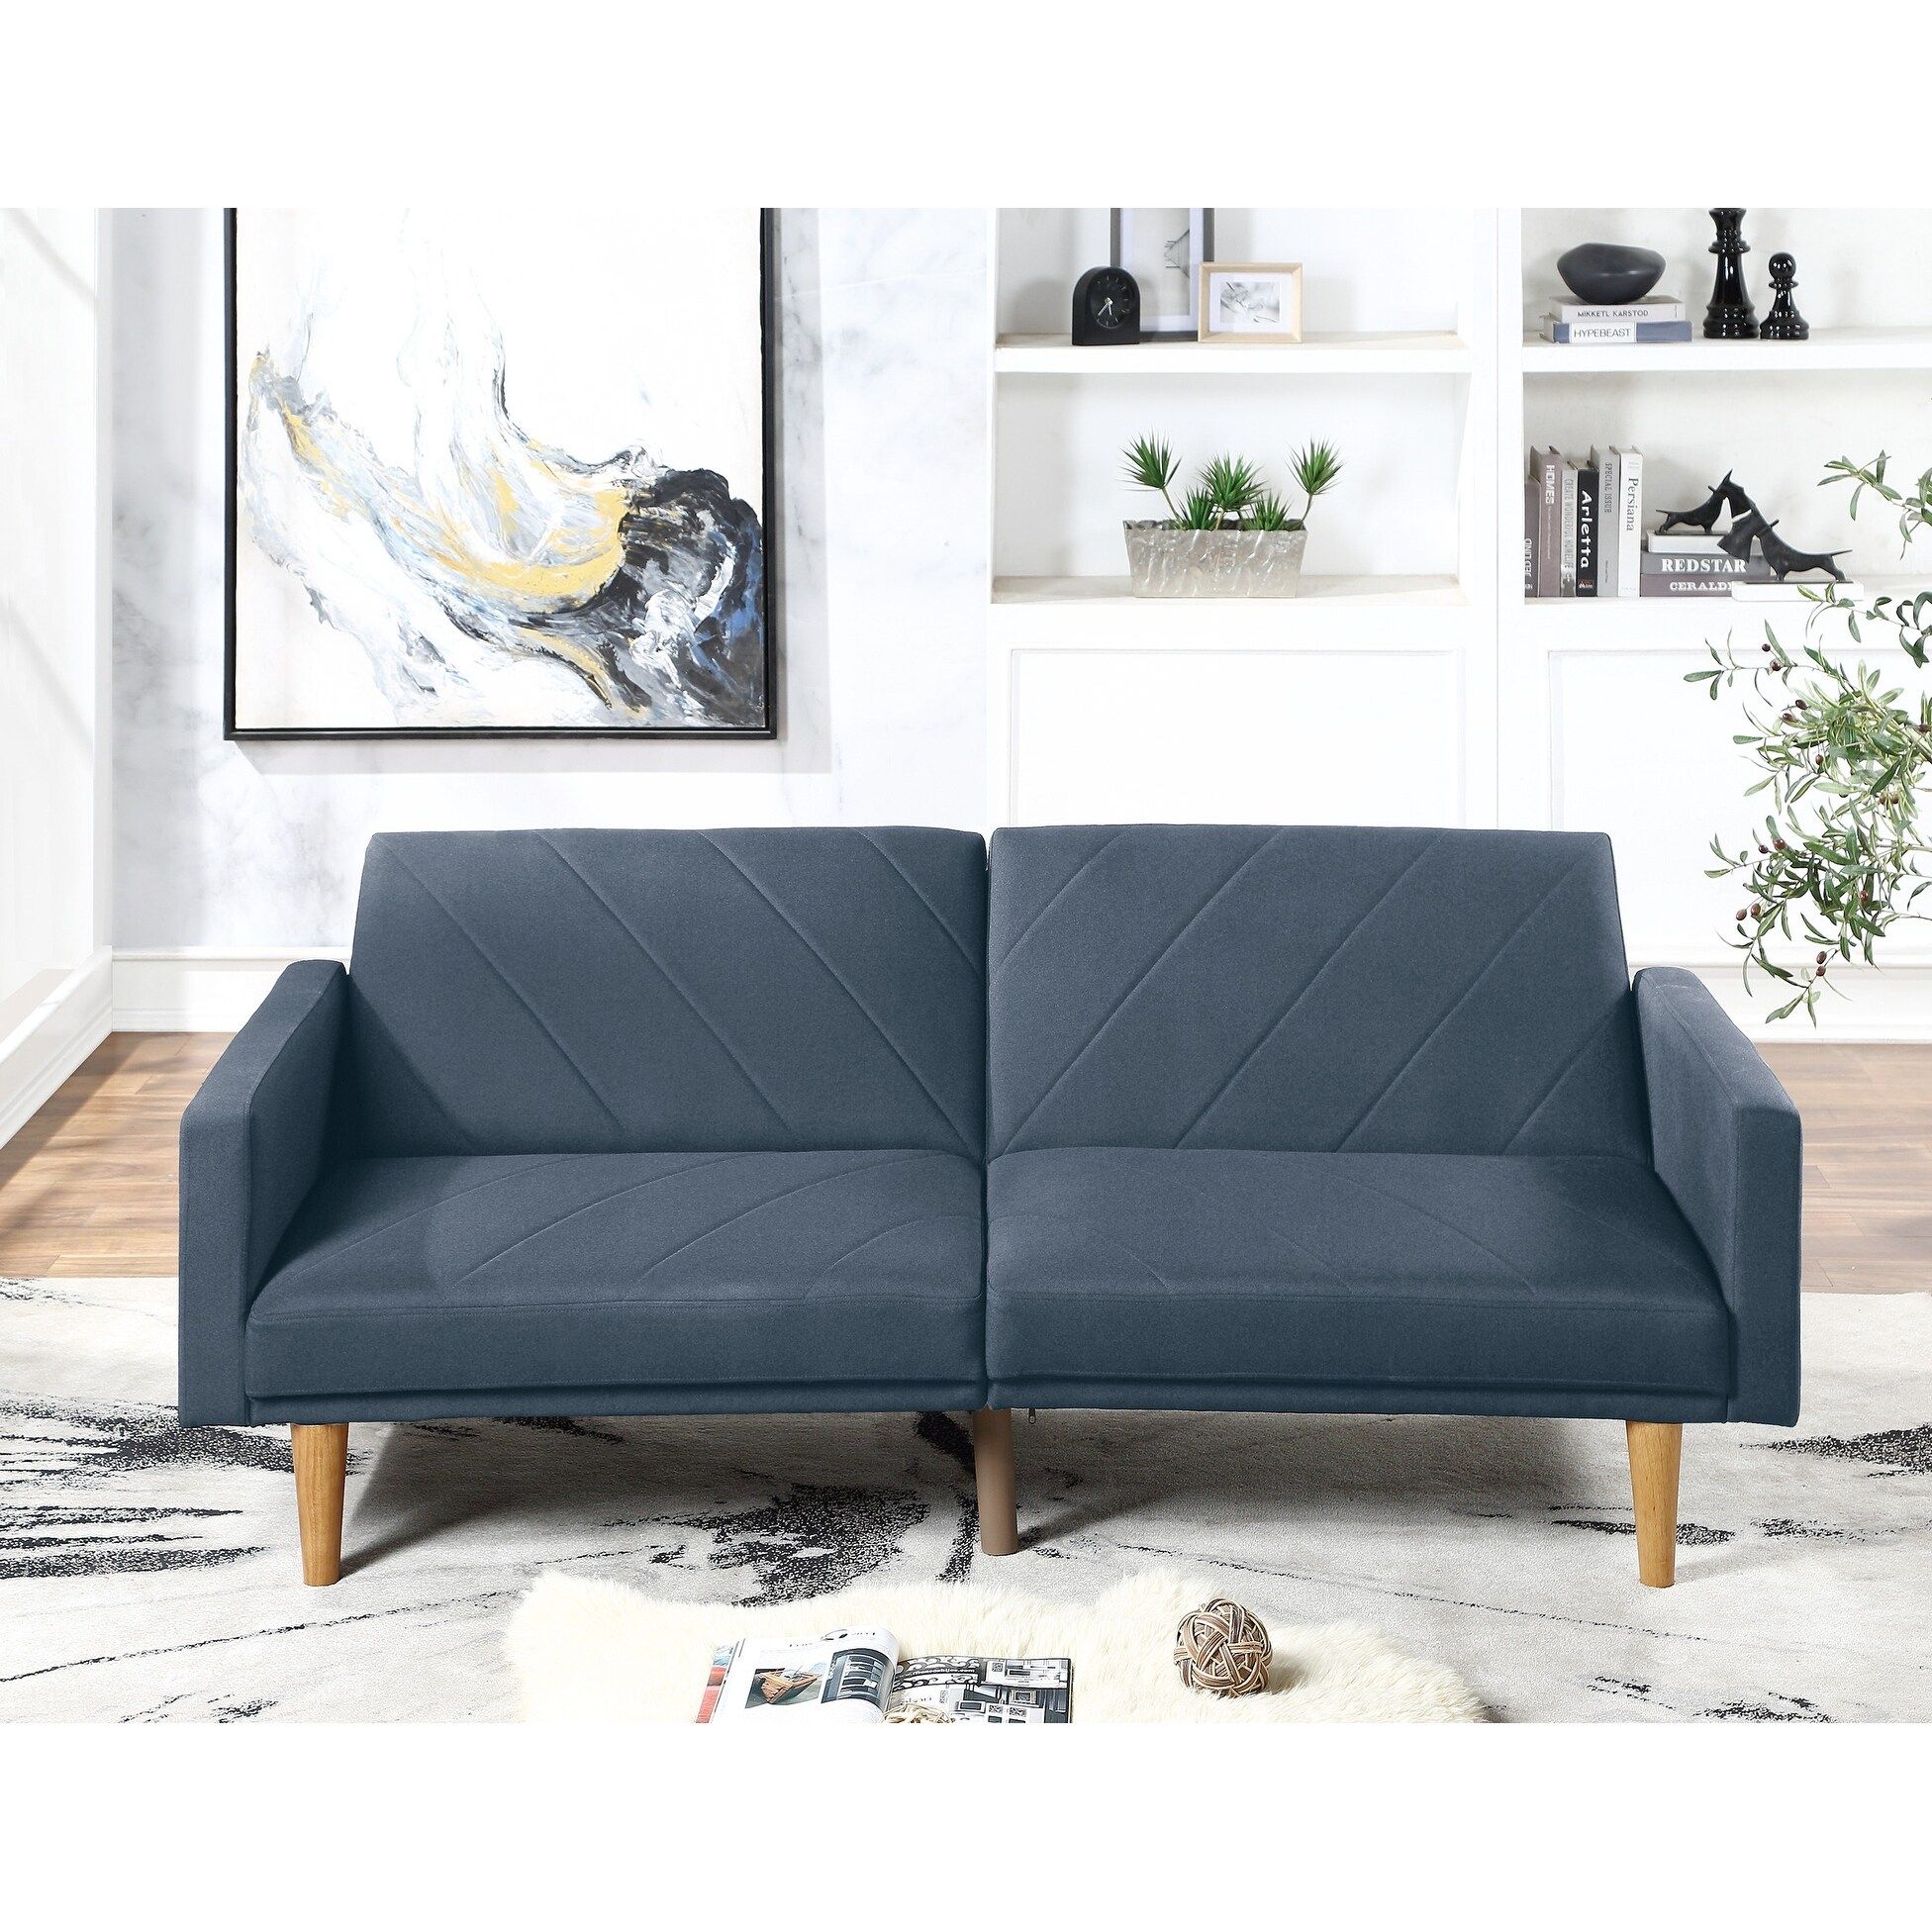 Modern Electric Look 1Pc Convertible Sofa Couch Navy Color Linen Like  Fabric Cushion Wooden Legs Living Room – Bed Bath & Beyond – 35204646 With Modern Blue Linen Sofas (View 6 of 15)